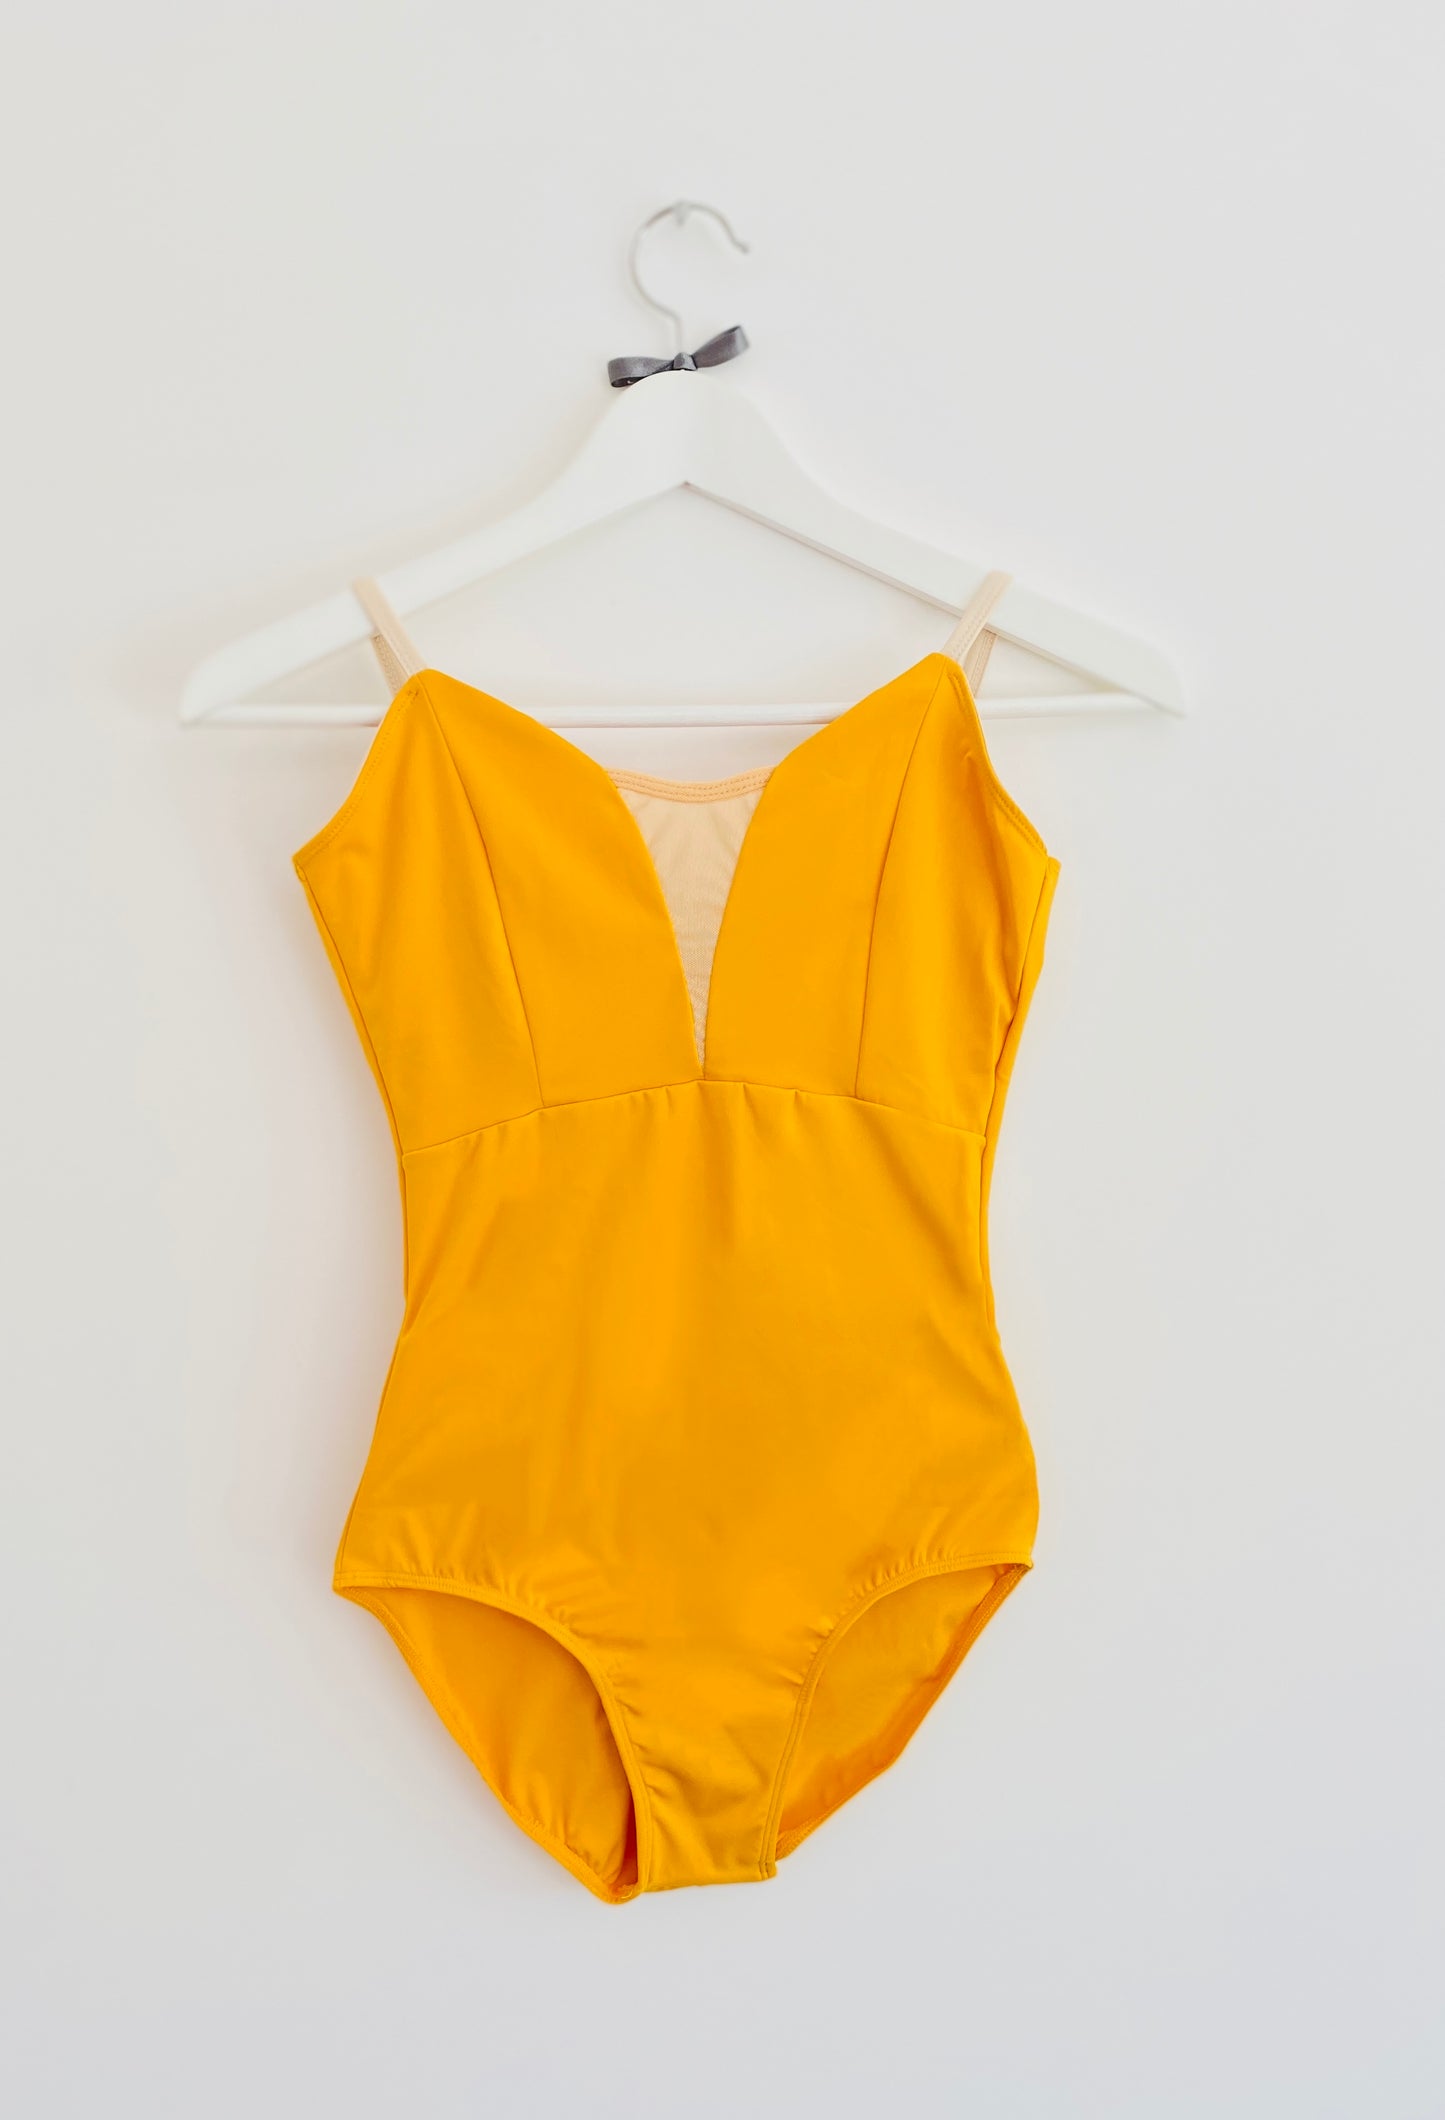 Saffron yellow V mesh camisole with deep back from The Collective Dancewear